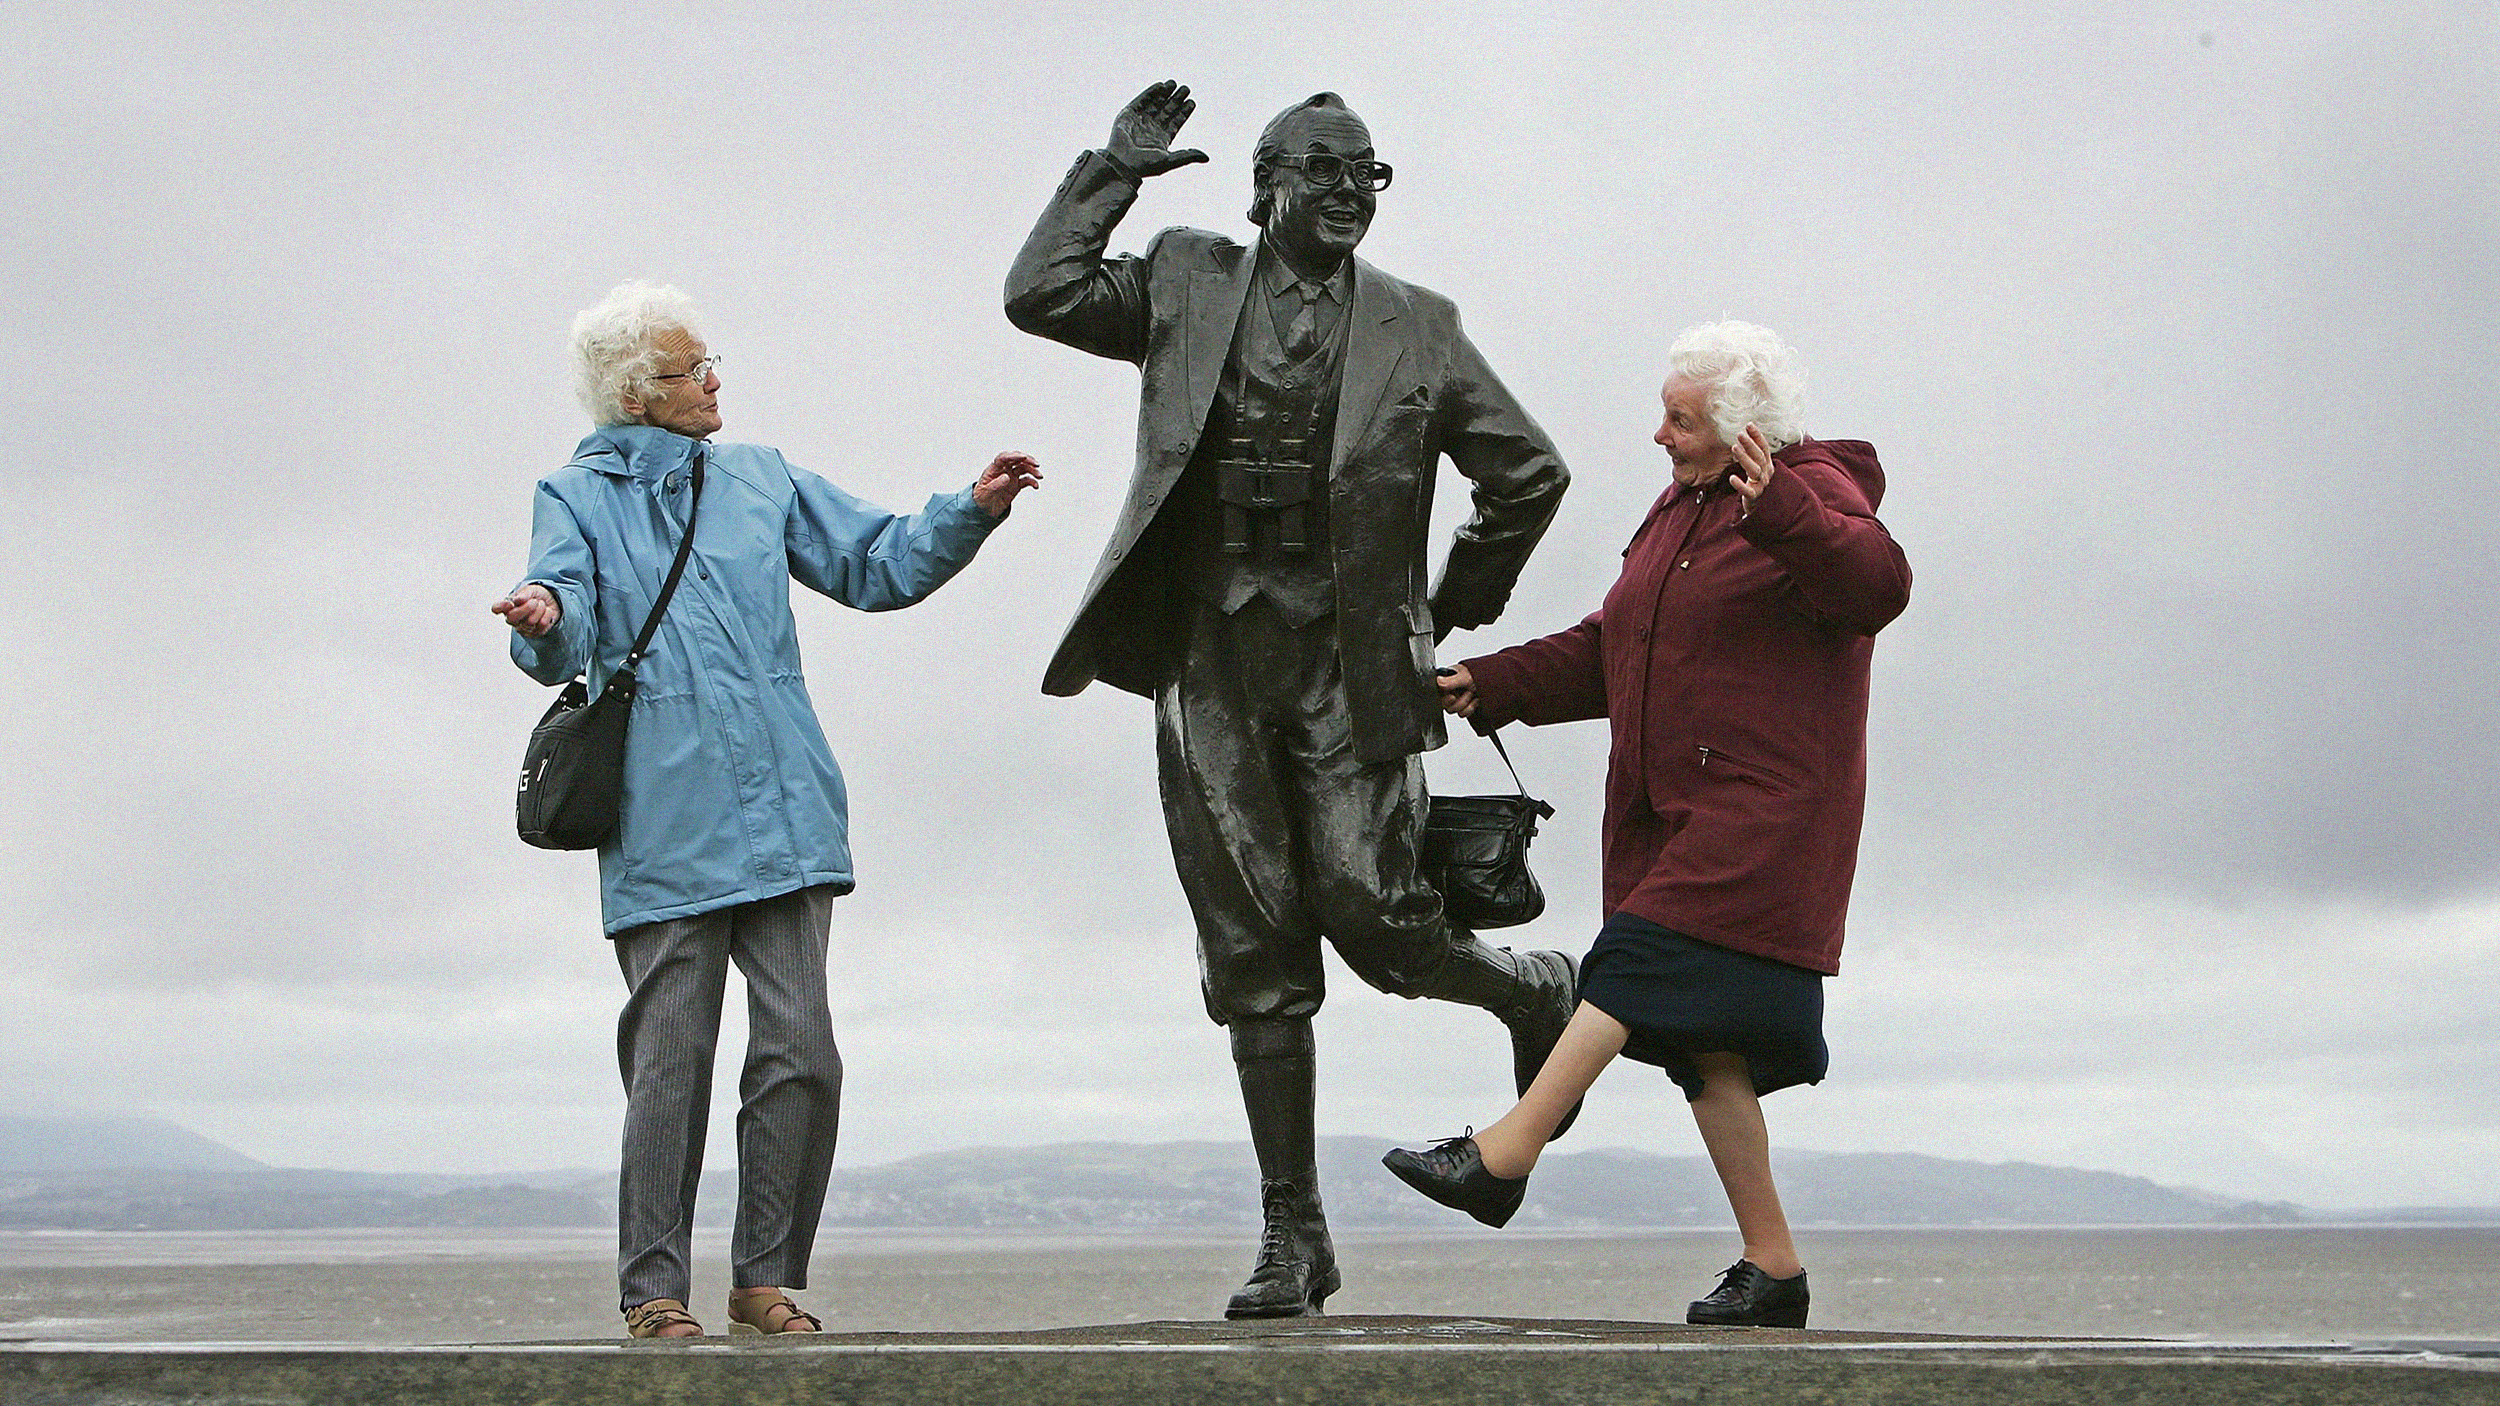 Two elderly women walking alongside and interacting with a statue of a man holding a briefcase.